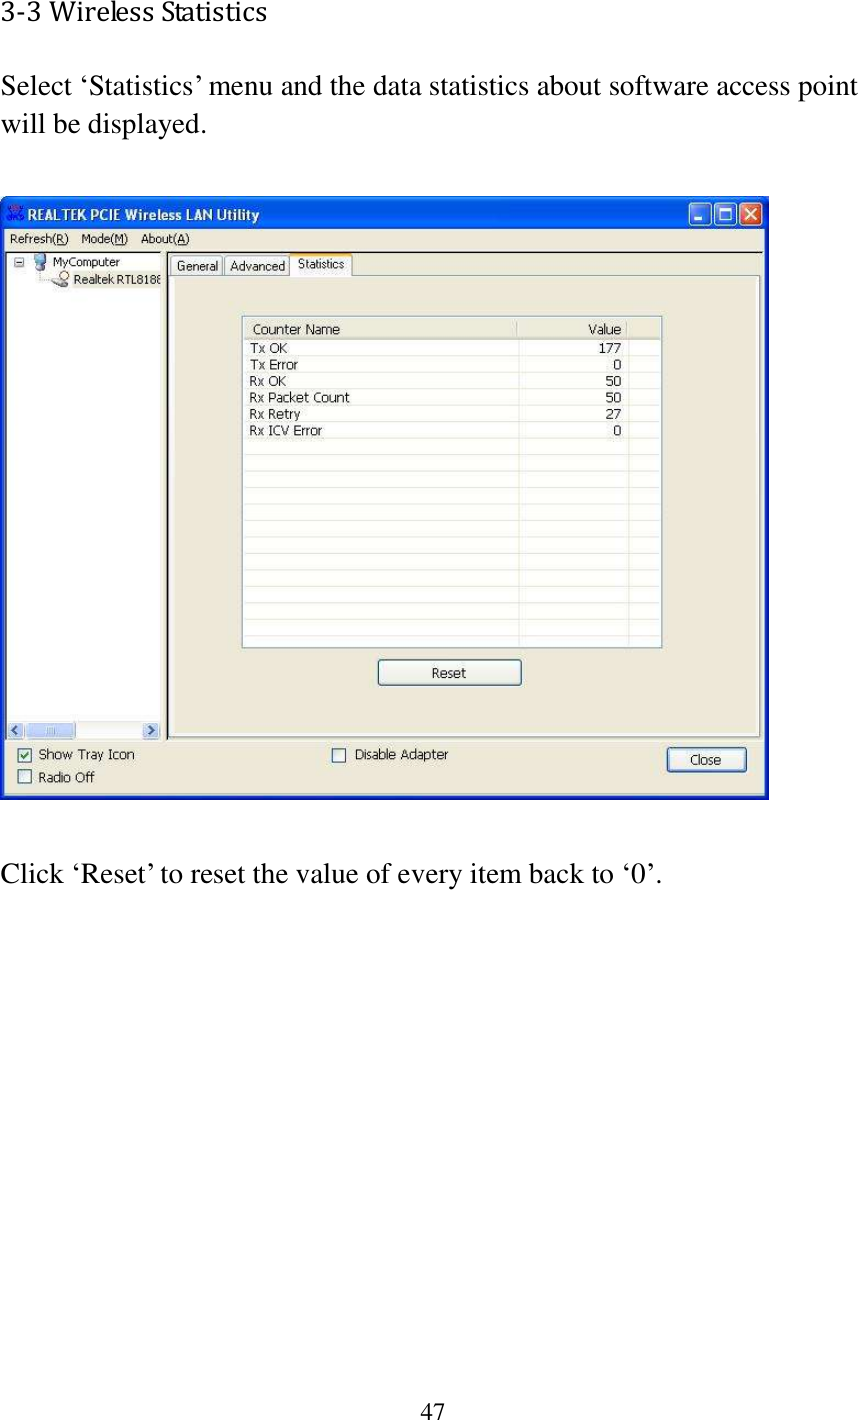 47  3-3 Wireless Statistics Select ‘Statistics’ menu and the data statistics about software access point will be displayed.    Click ‘Reset’ to reset the value of every item back to ‘0’. 